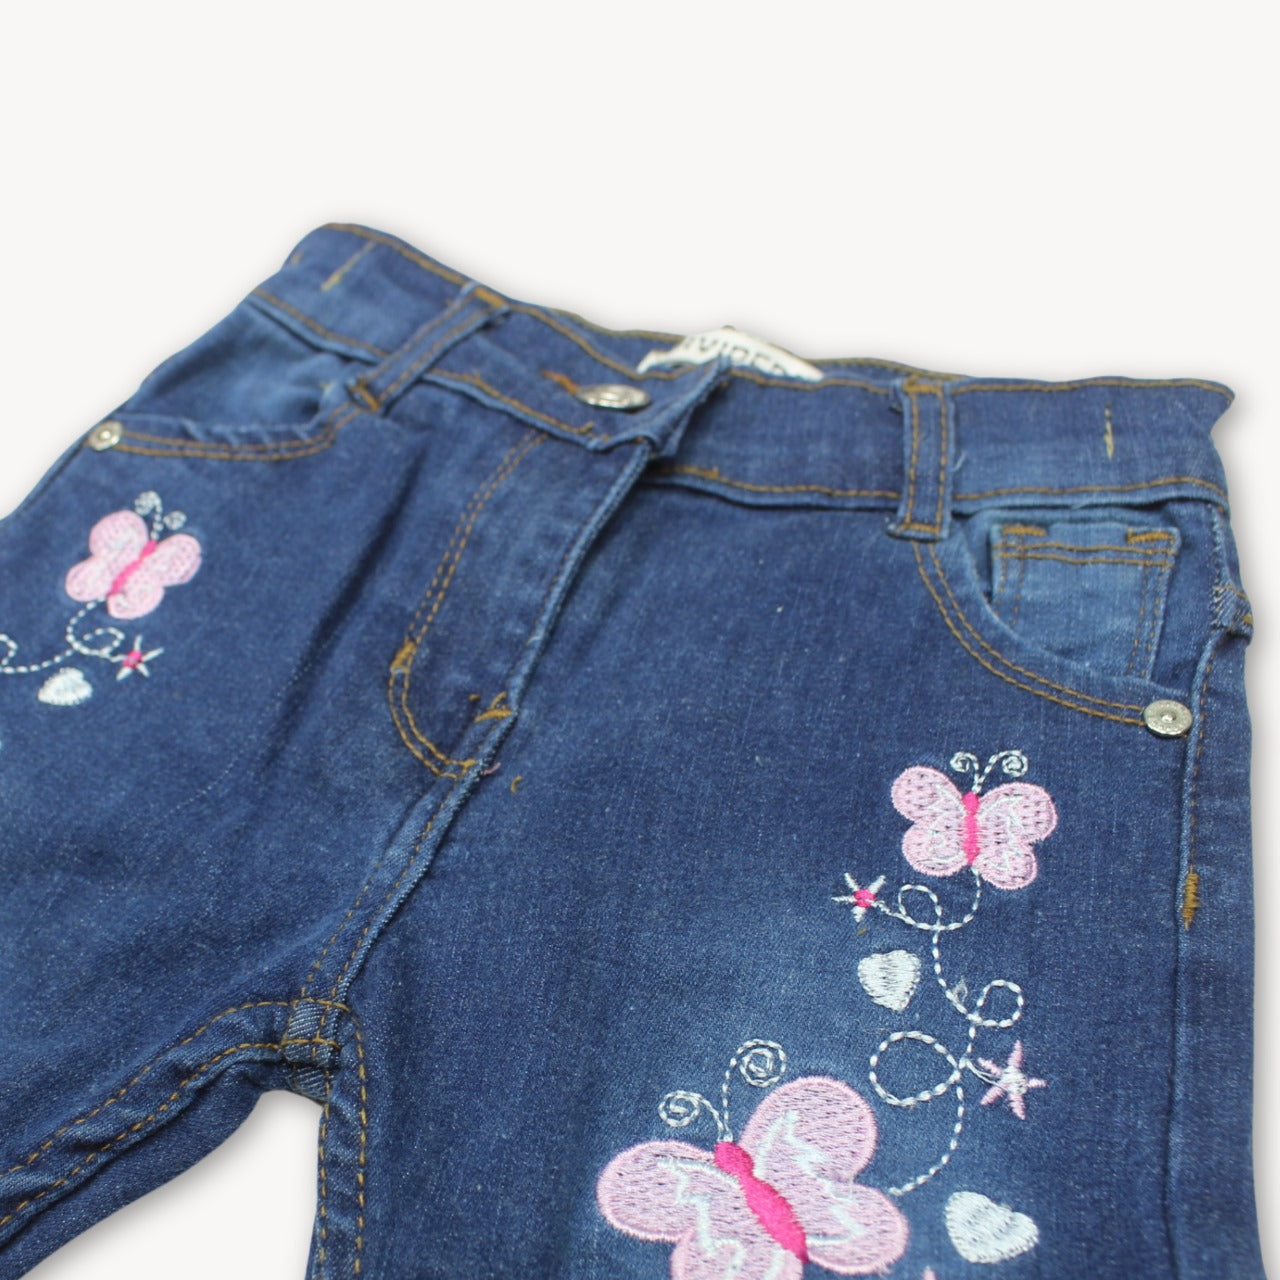 Aegean Blue Butteryfly Embroidered Denim Jeans